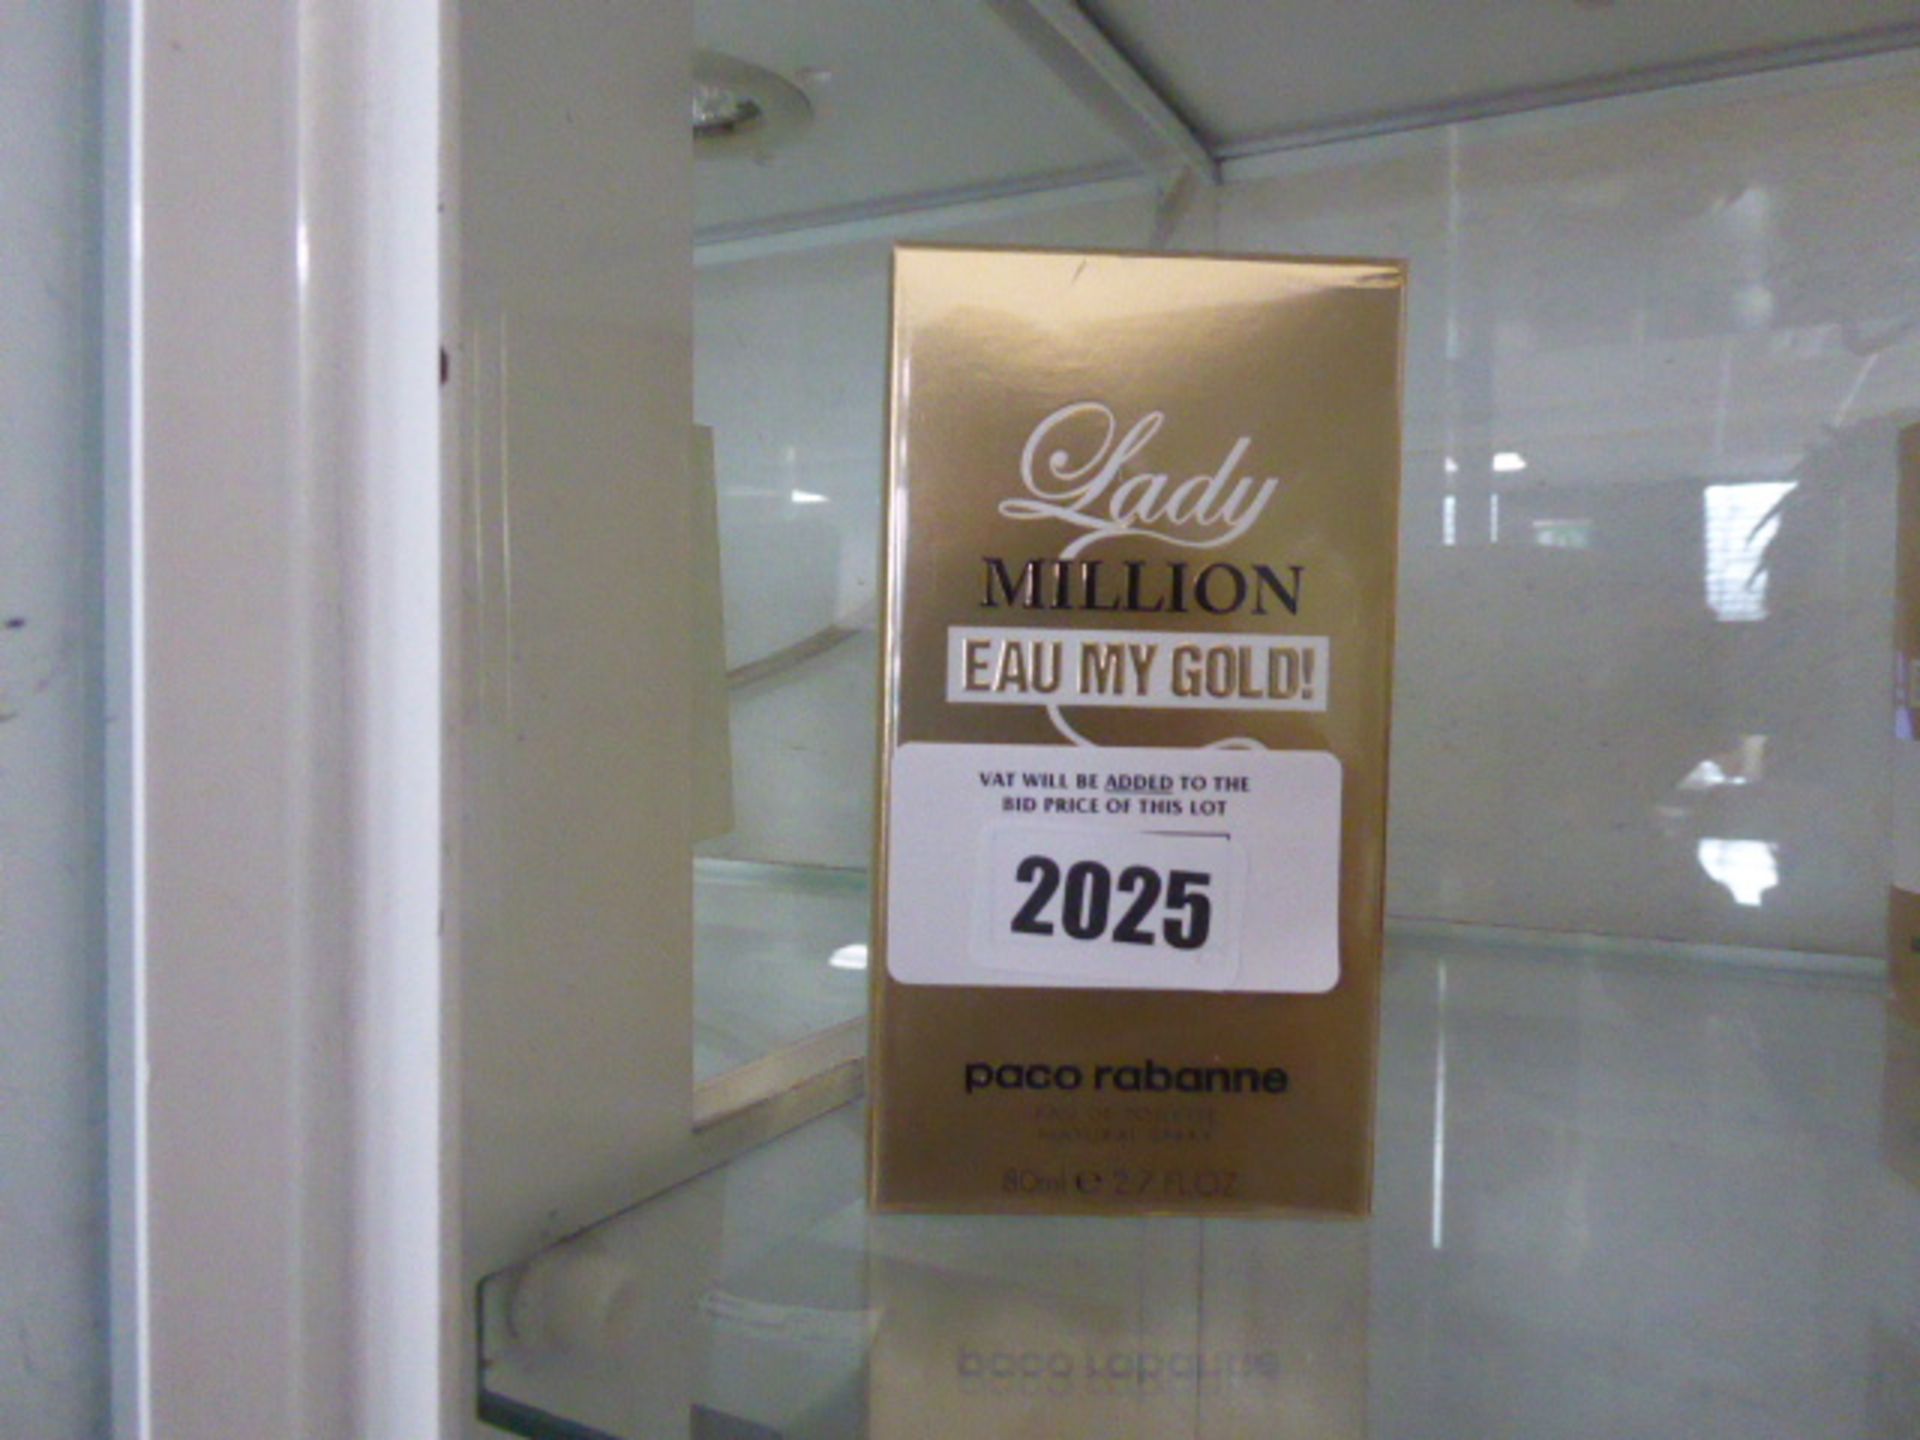 Lady Million by Paco Rabanne, 80ml perfume in sealed box